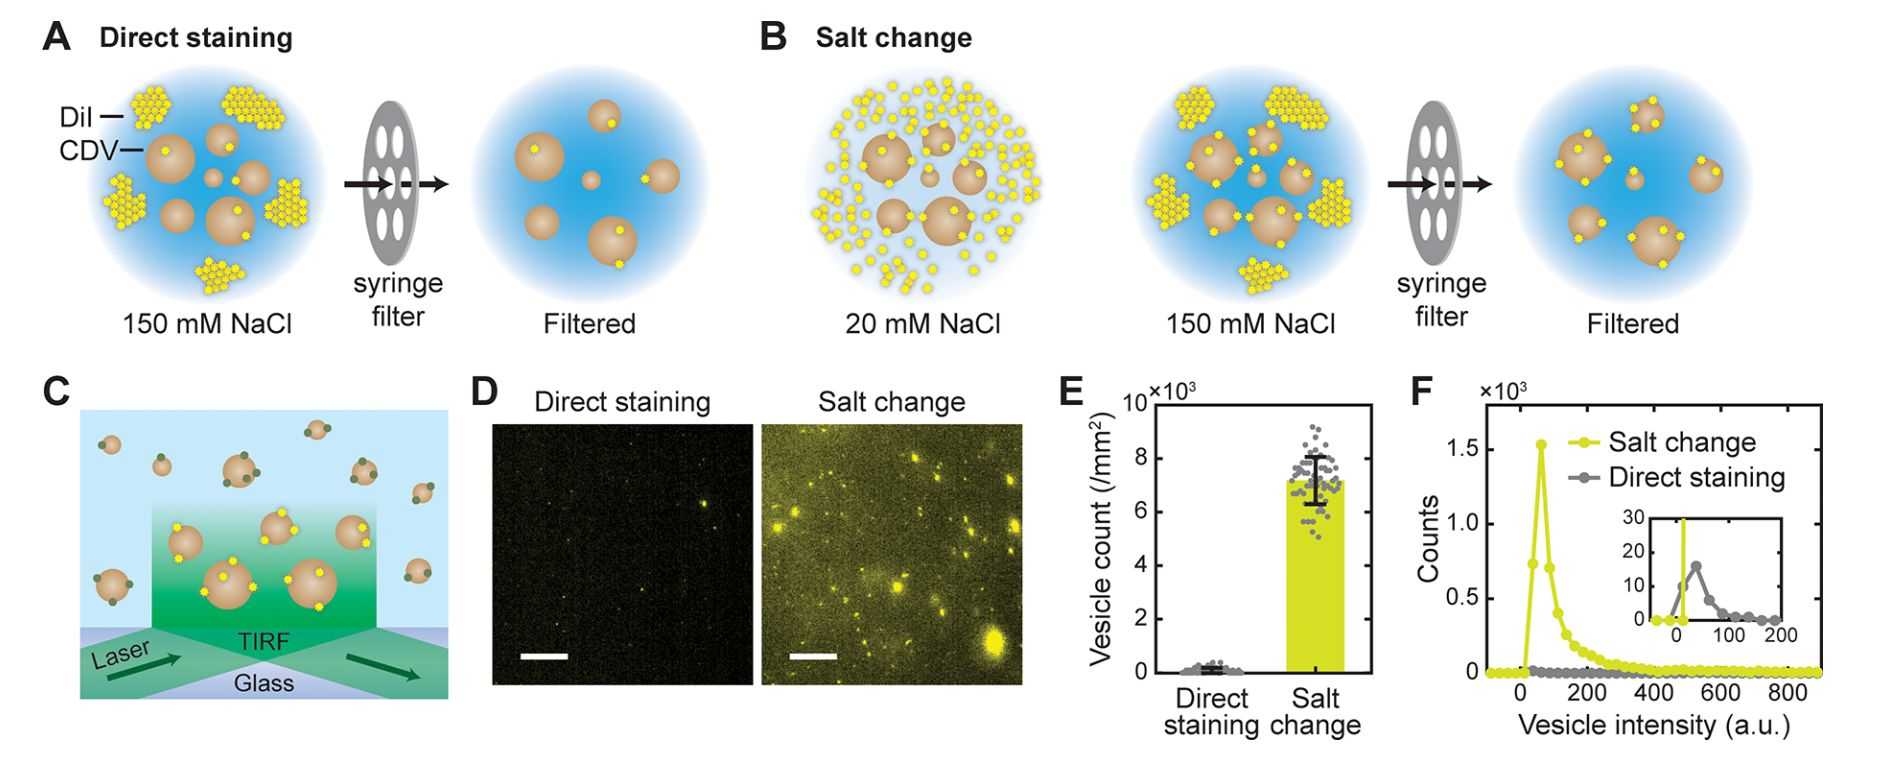 Figure 3. Schematics of the direct staining and salt-change method for labeling cell-derived vesicles (CDVs) with DiI.